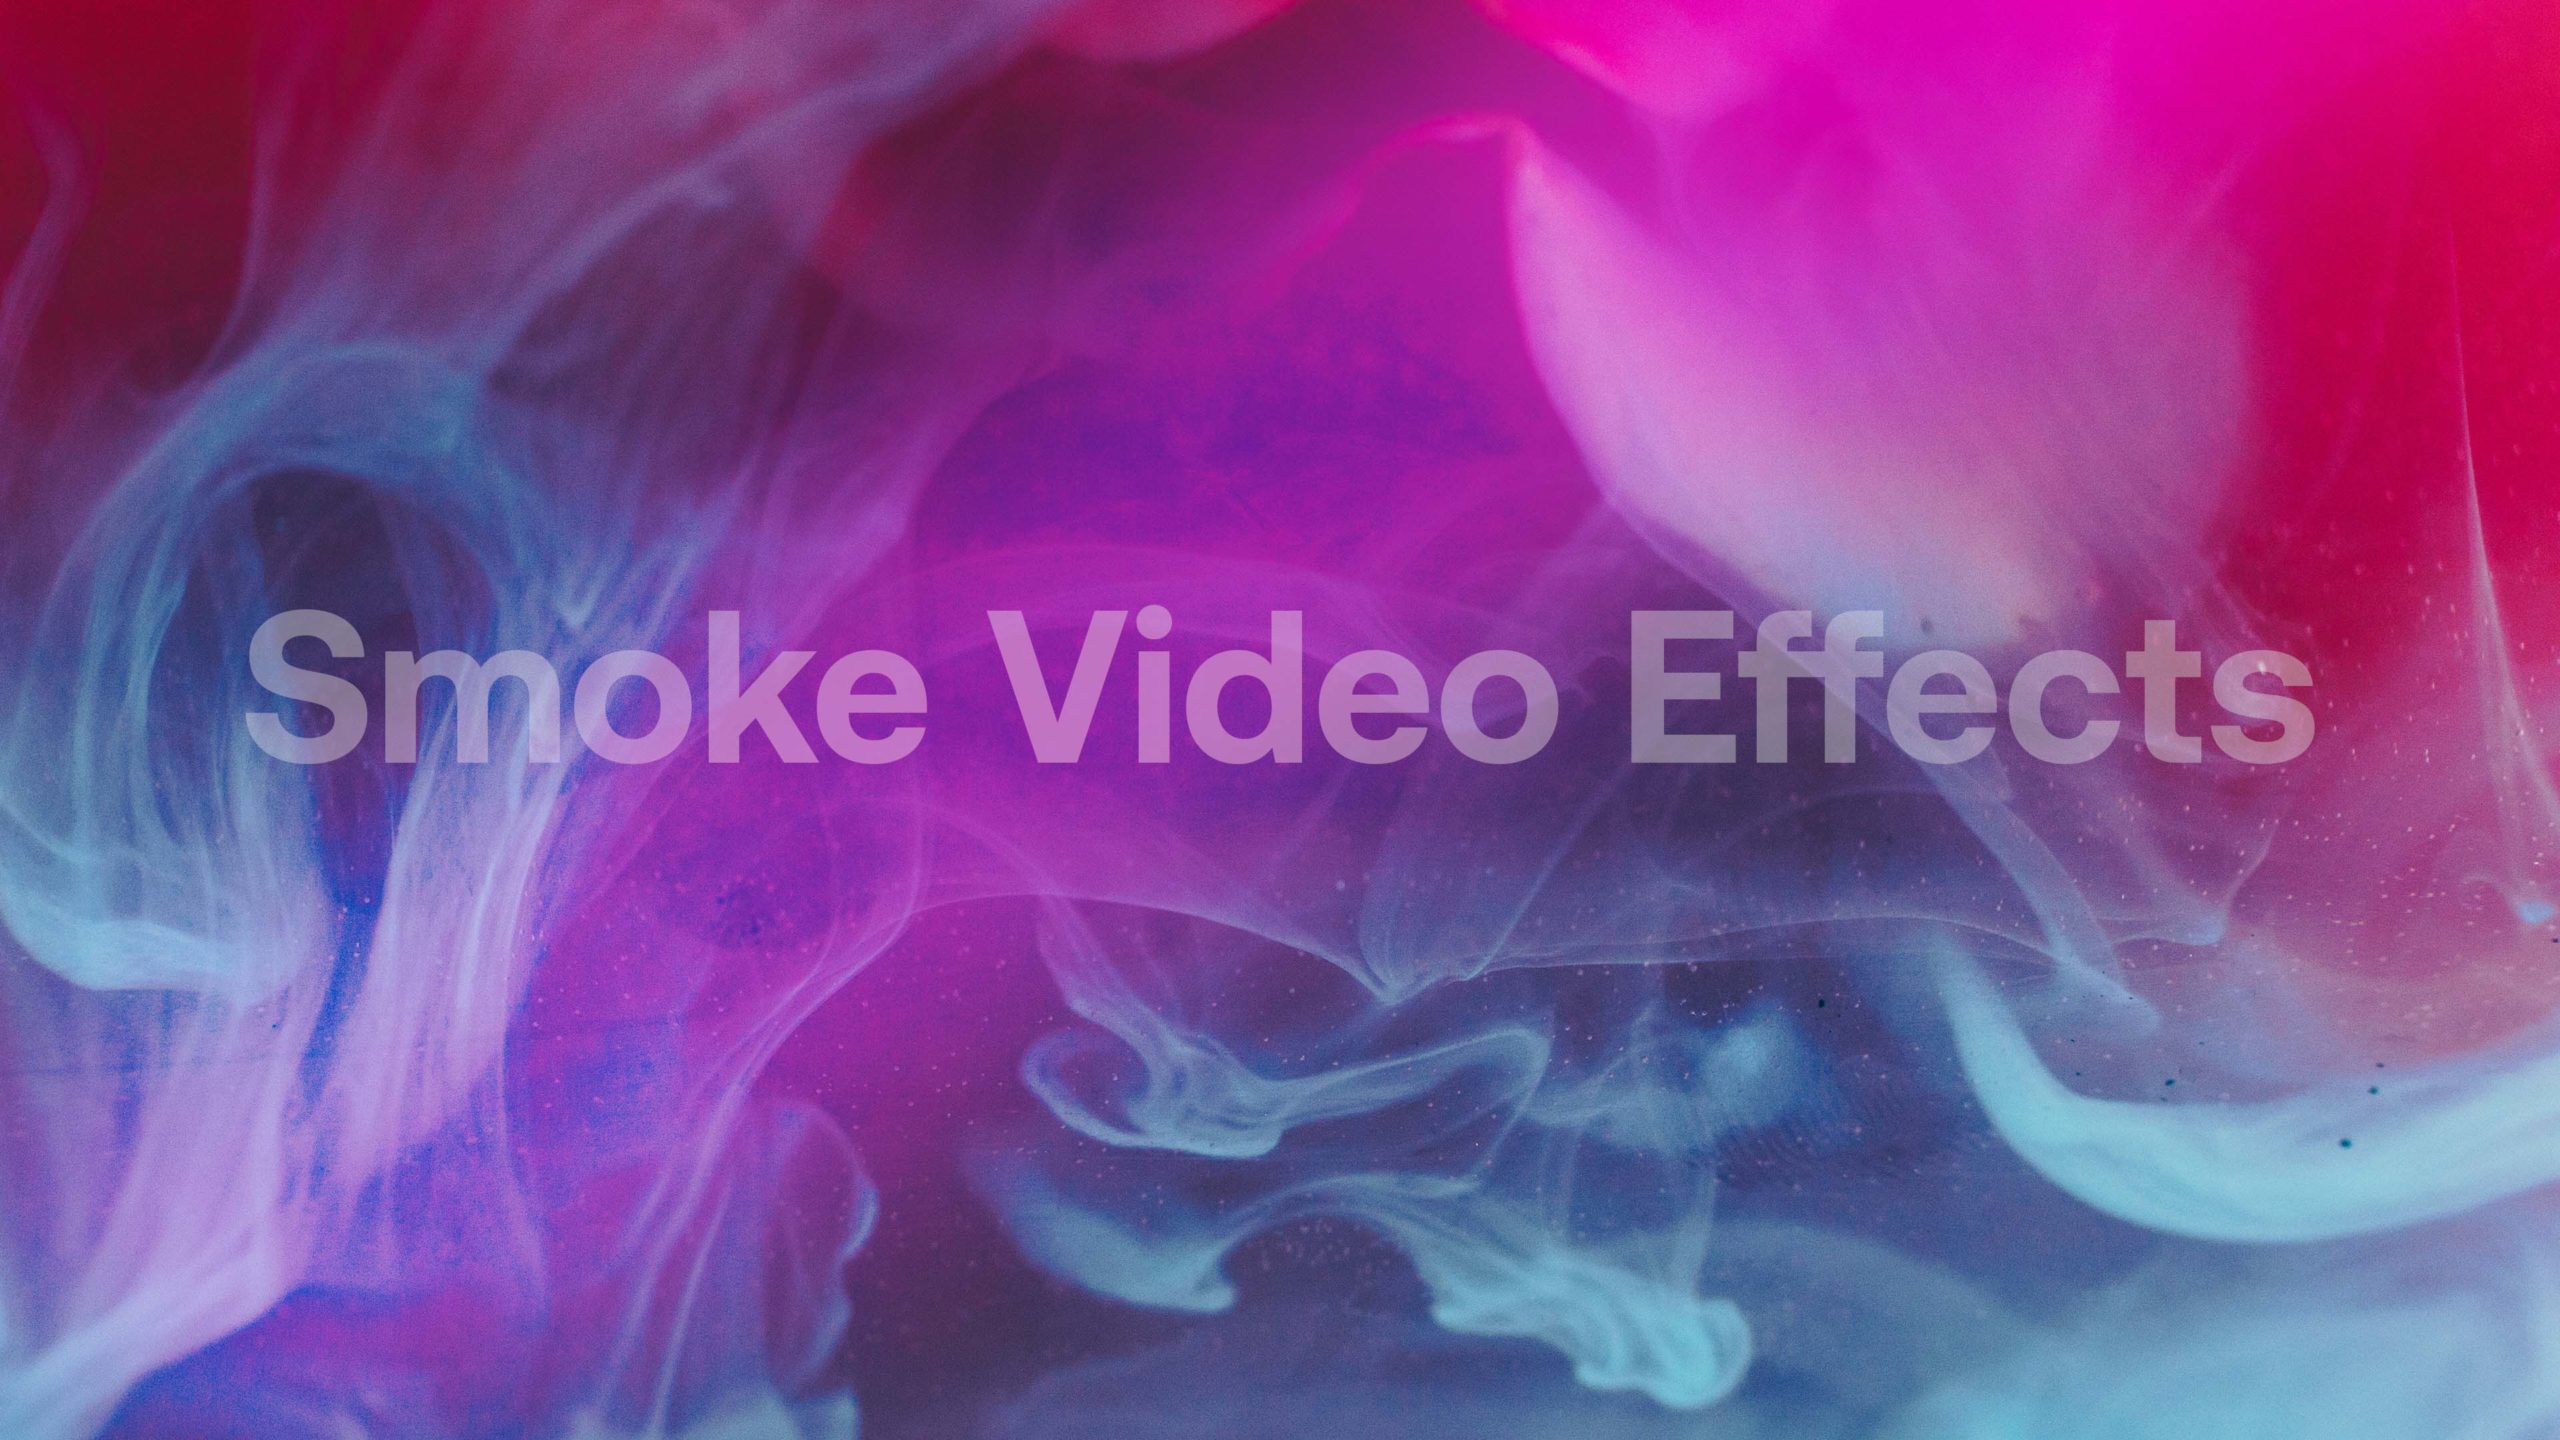 20 Cool Smoke Video Effects & Templates for Editors (VFX Editing Tips) -  Motion Array